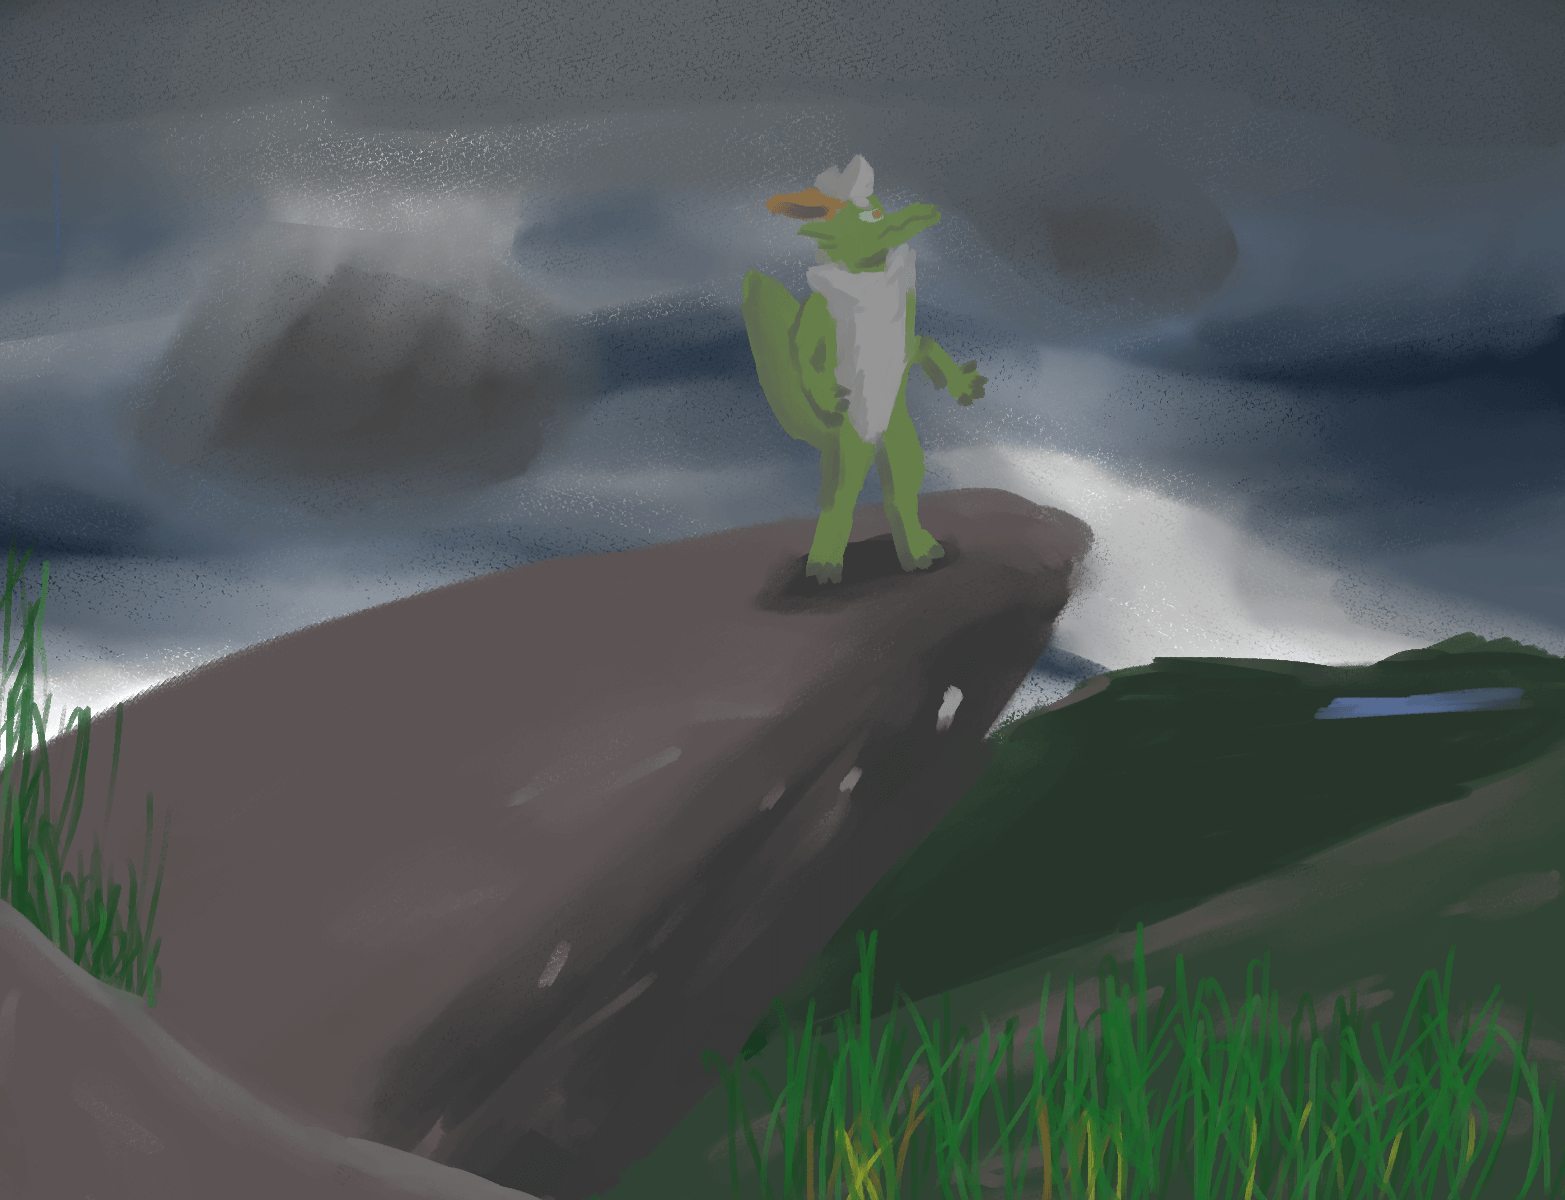 Kero stands on a cliff against a stormy background.